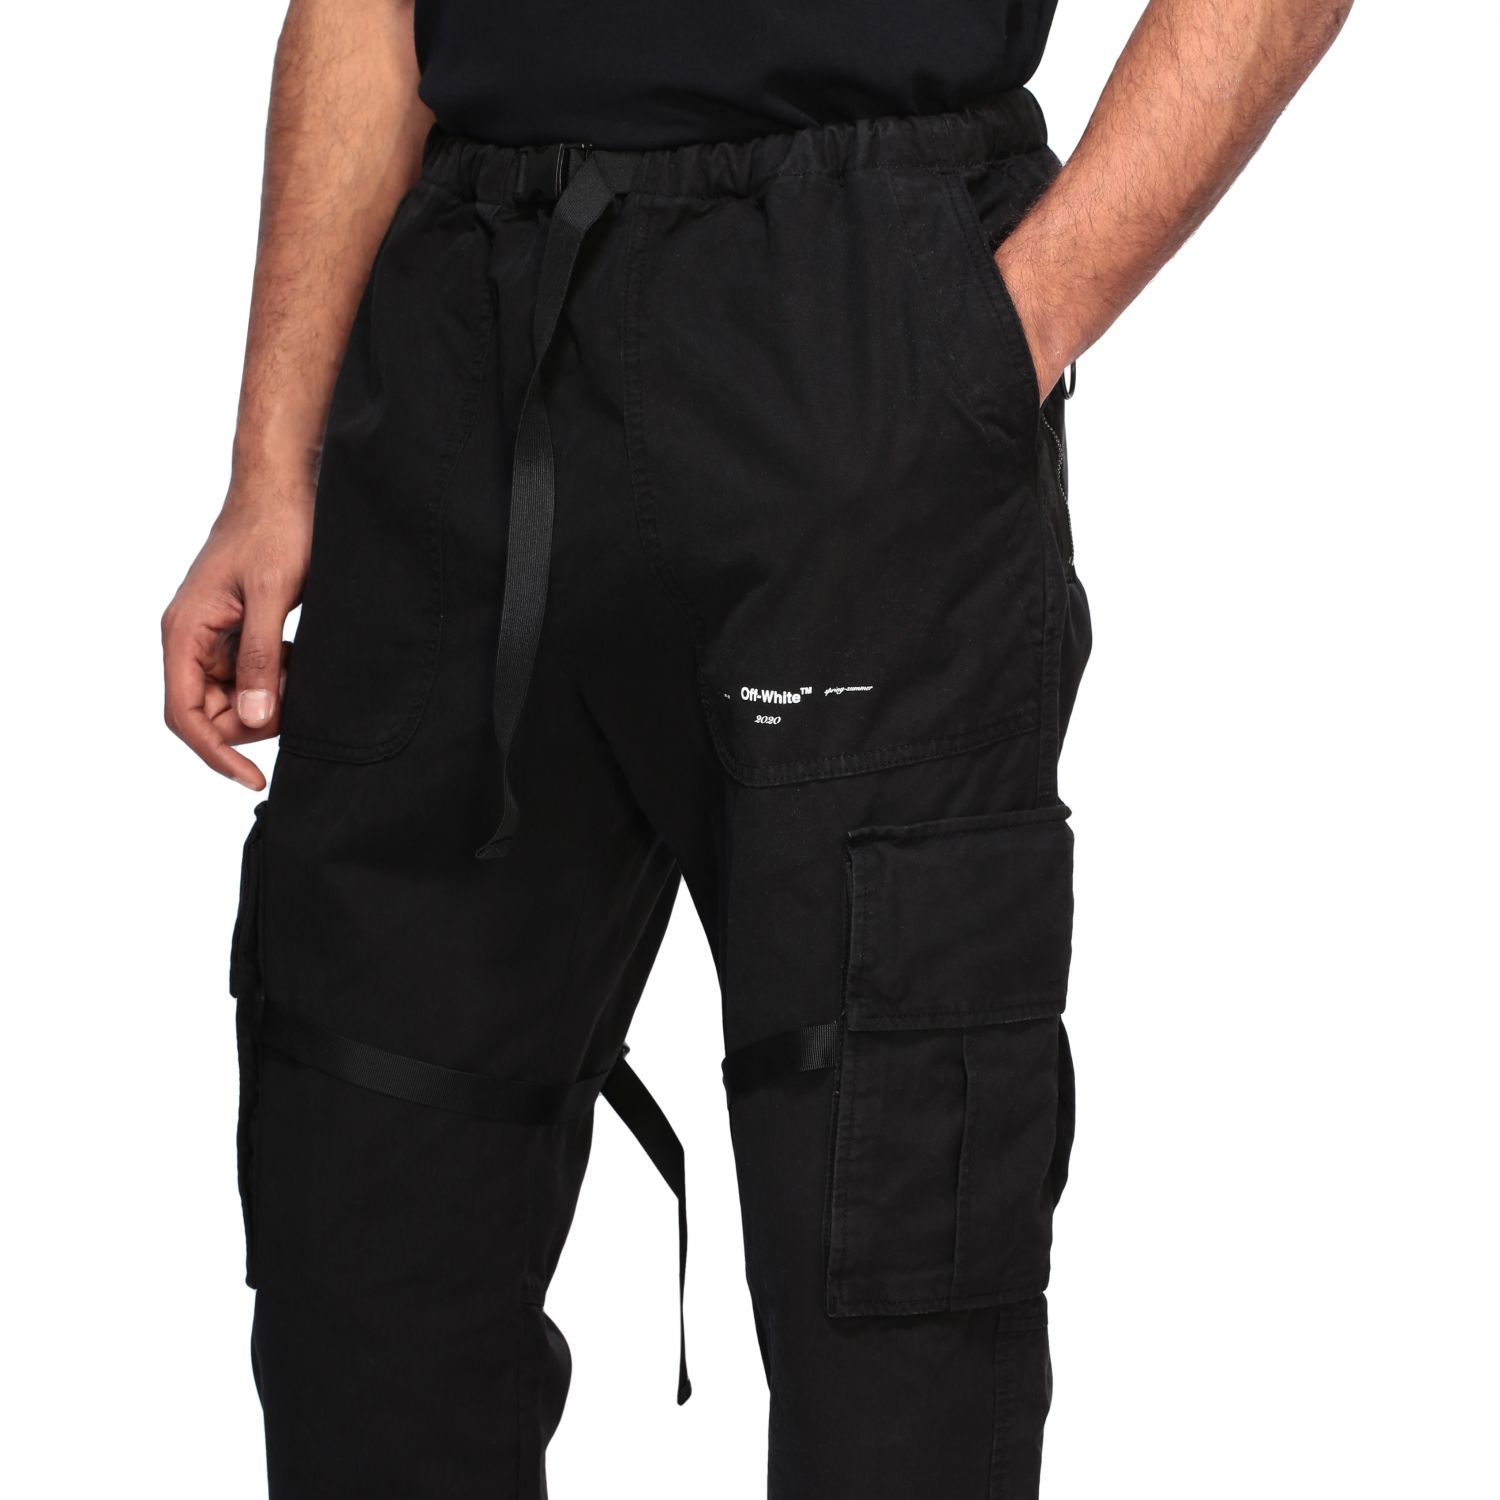 OFF WHITE: jogging-style trousers with logo | Pants Off White Men Black | Pants Off White GIGLIO.COM